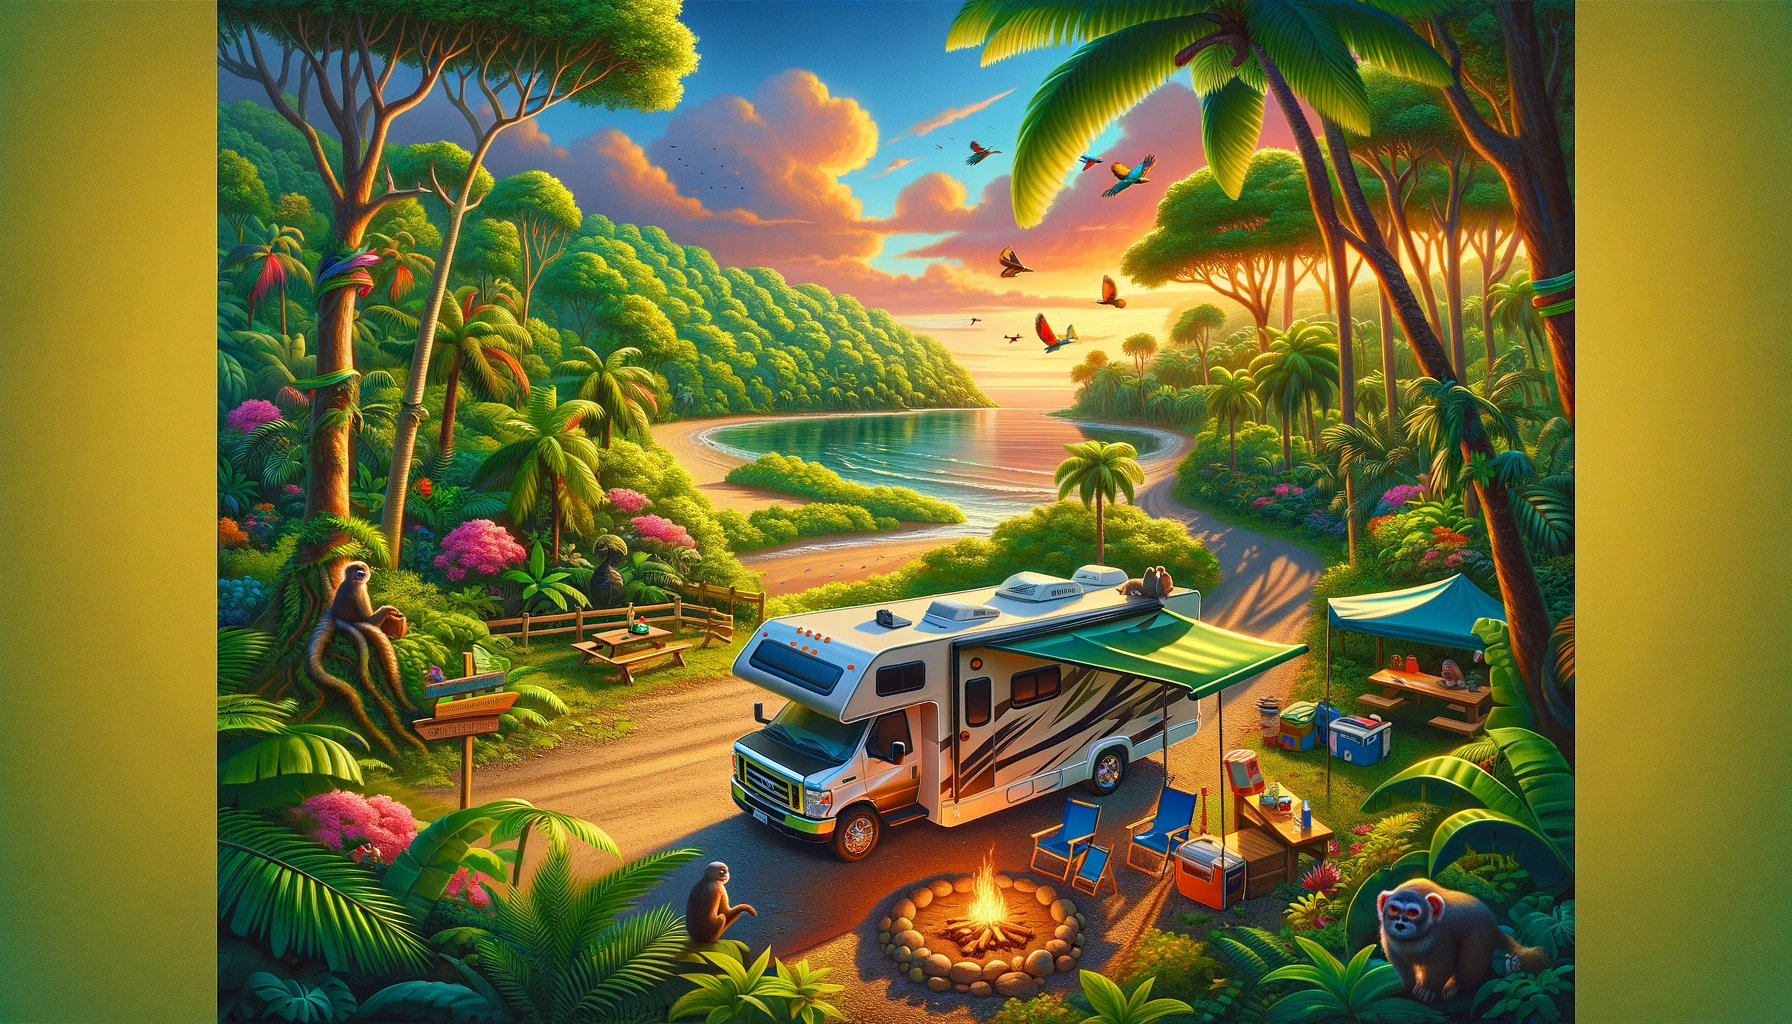 DALL·E 2024 06 02 16.23.43 A vibrant scene of RV camping in Costa Rica. The RV is parked in a lush tropical setting, surrounded by dense green rainforest, with colorful birds an